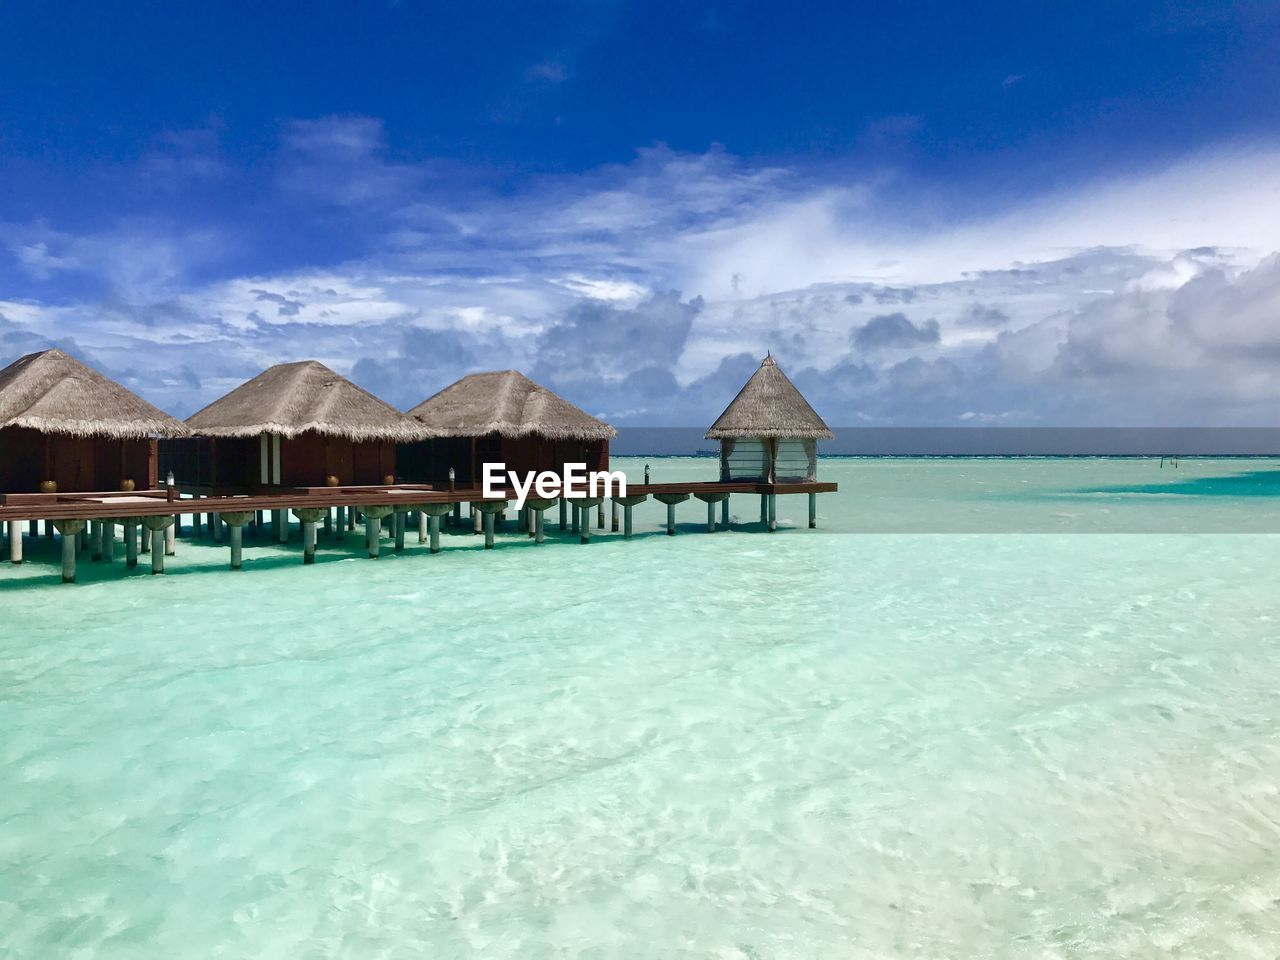 water, sky, hut, ocean, sea, thatched roof, nature, land, architecture, scenics - nature, beauty in nature, built structure, stilt house, cloud, house, travel destinations, beach, blue, vacation, tranquility, building, building exterior, tranquil scene, roof, turquoise colored, shore, no people, tourist resort, lagoon, idyllic, tropical climate, holiday, landscape, trip, travel, island, residential district, resort, outdoors, environment, day, coast, beach hut, sand, bay, tourism, mountain, sunlight, summer, horizon, holiday villa